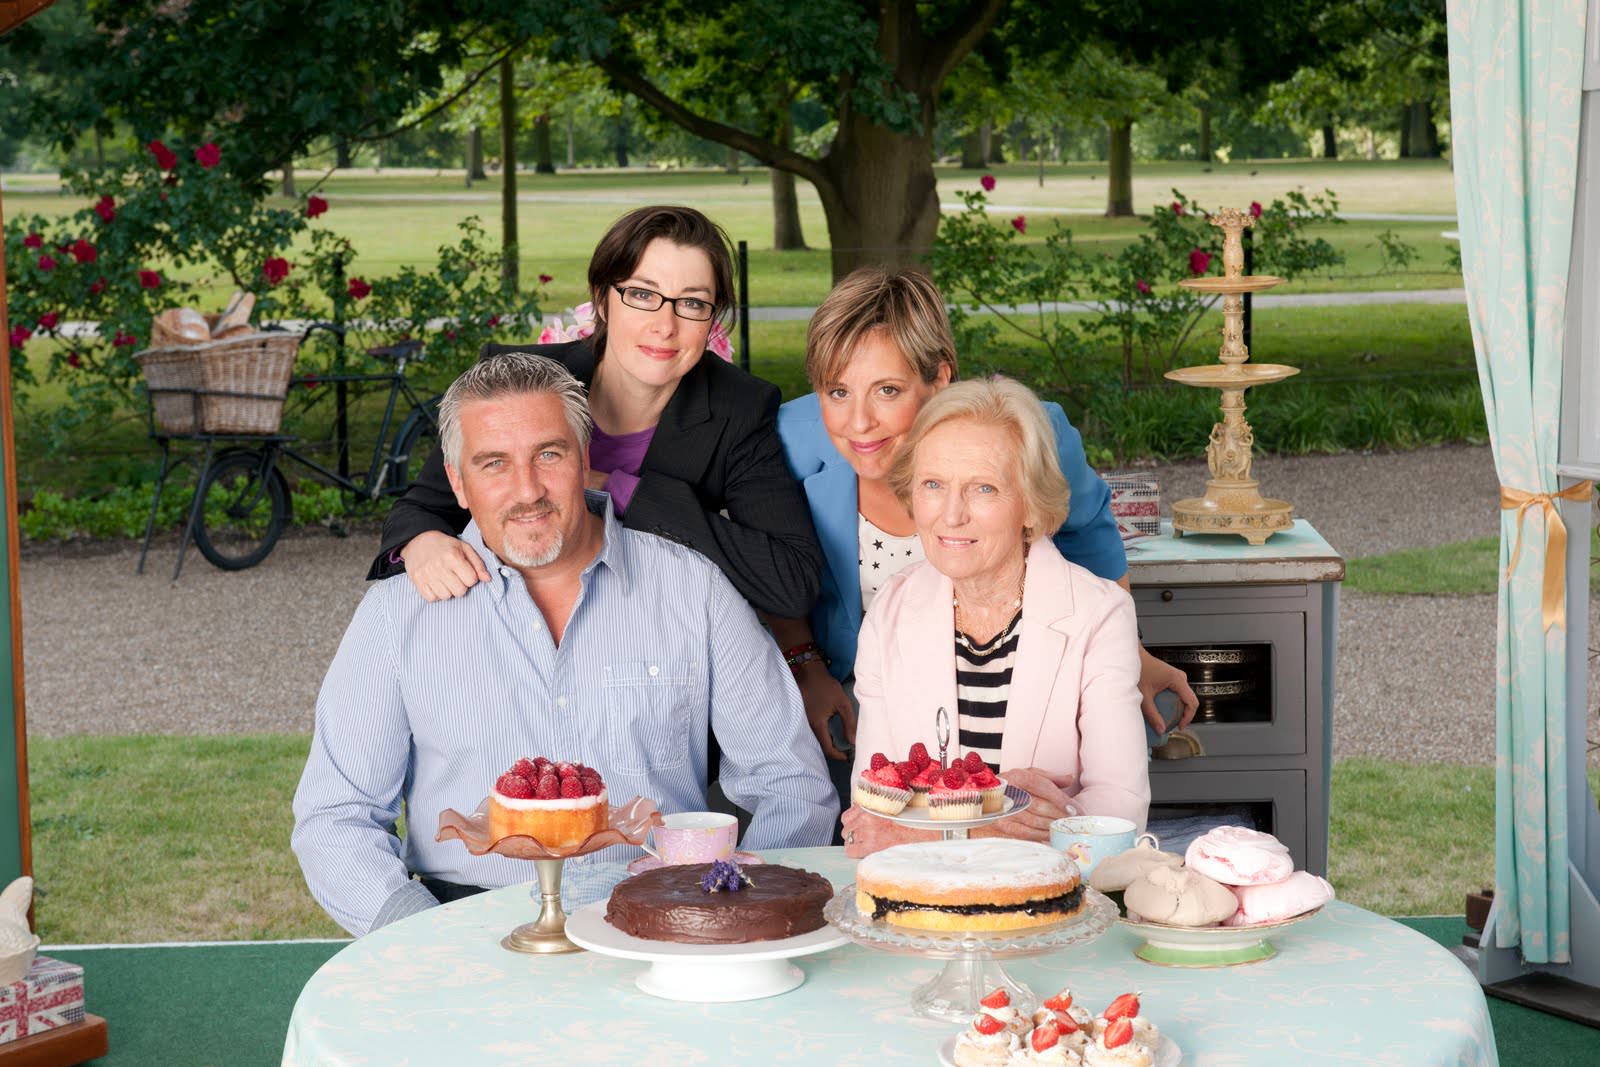 15 Reasons We Love The Great British Bake Off